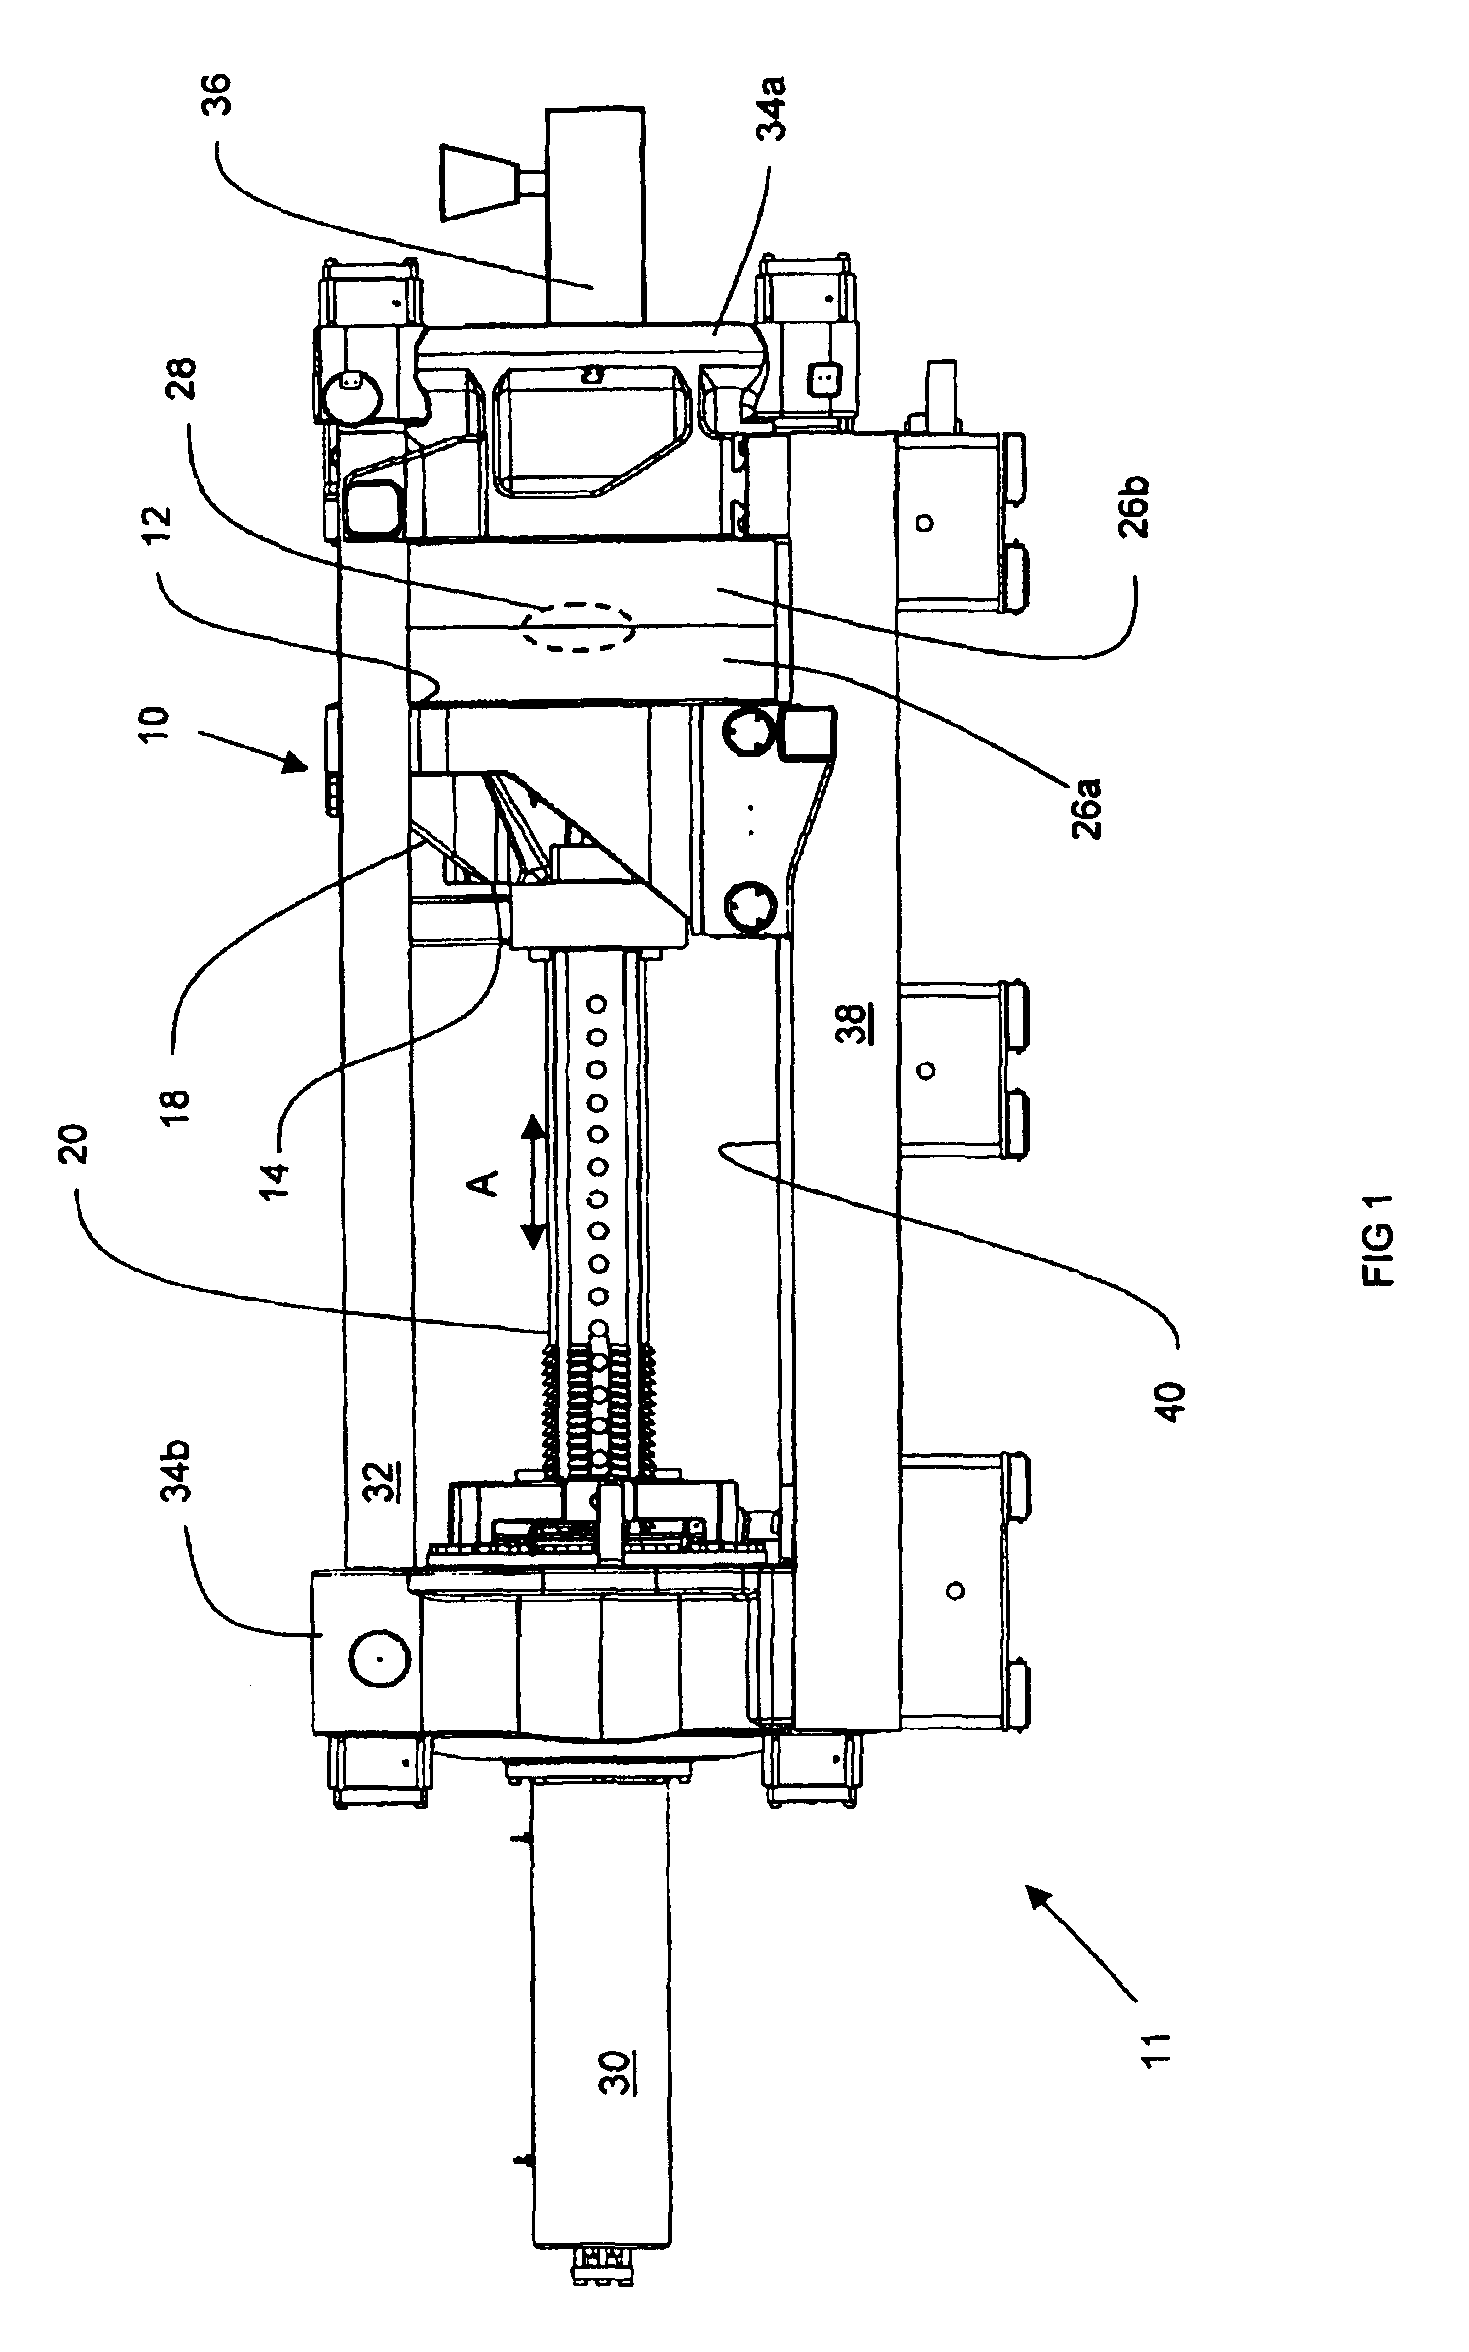 Injection molding machine having a platen for uniform distribution of clamping forces